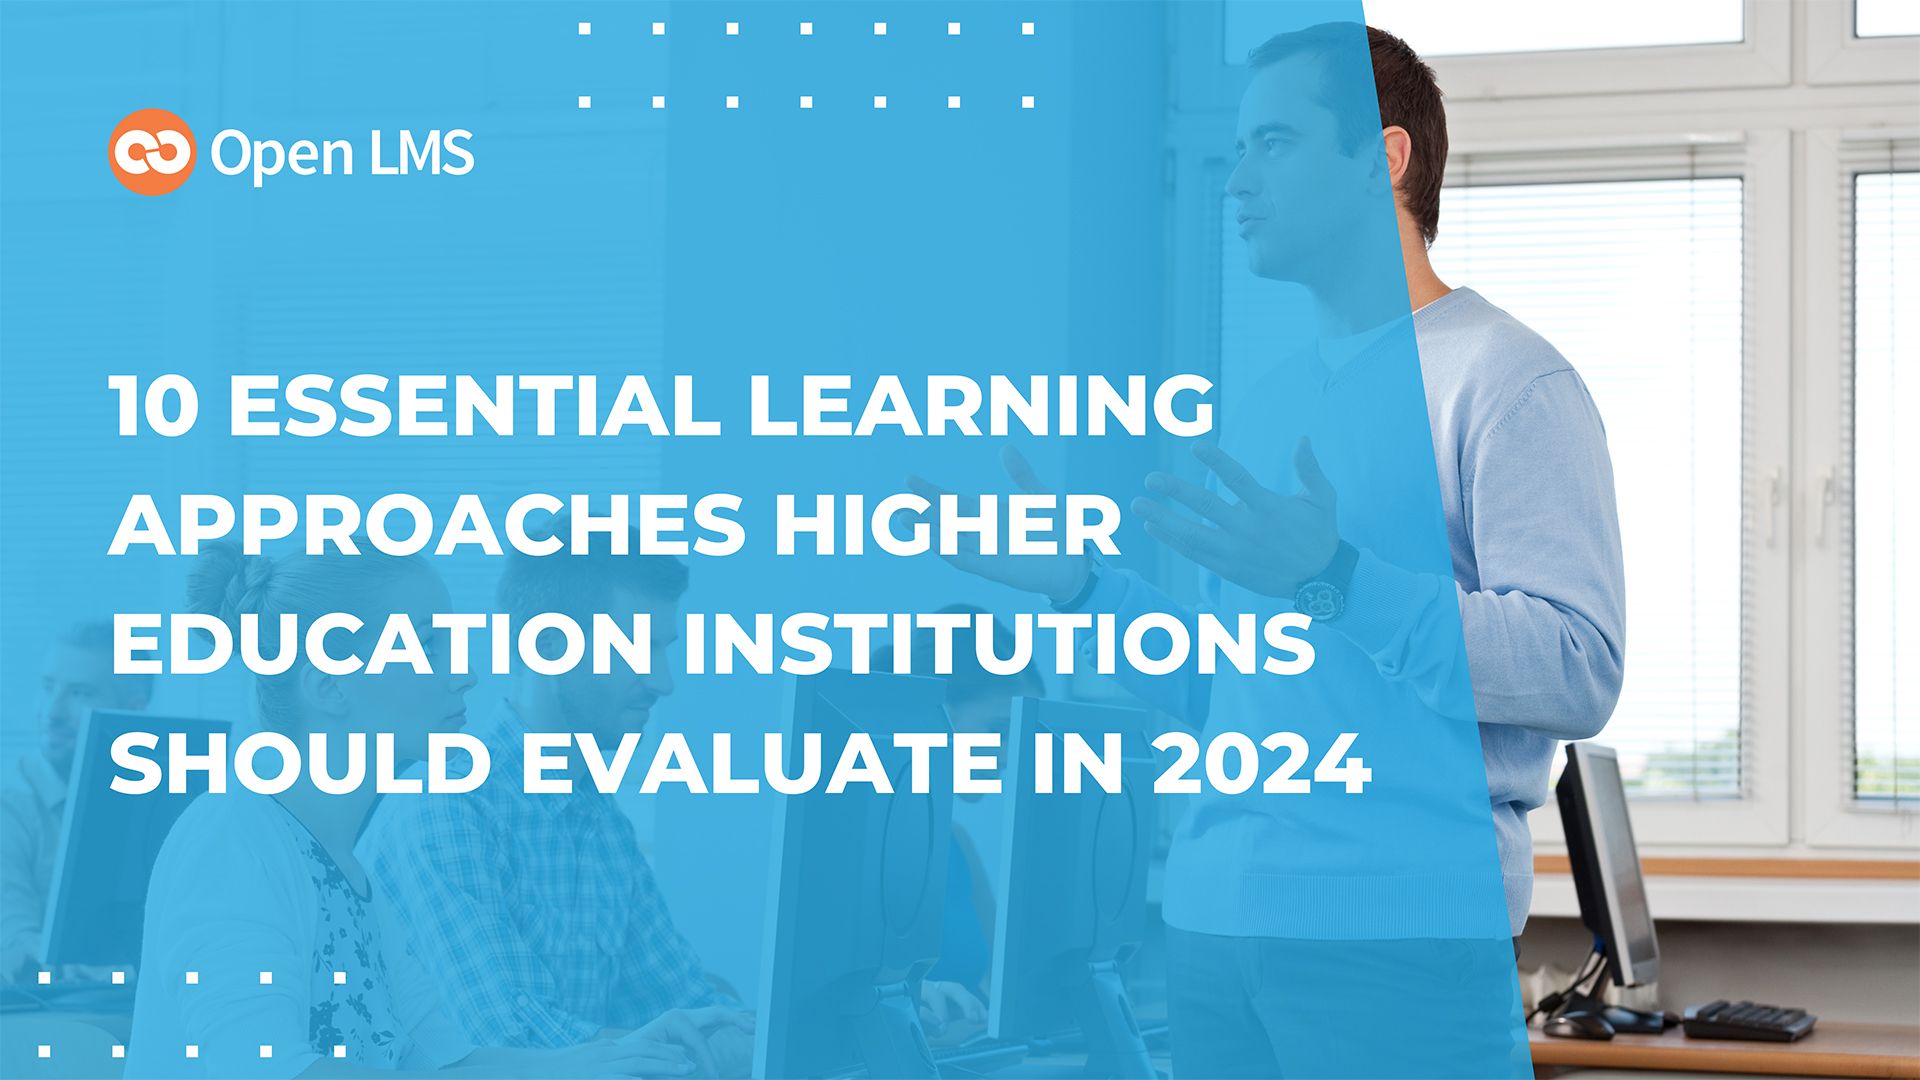 10 Essential Learning Approaches Higher Education Institutions Should Evaluate in 2024